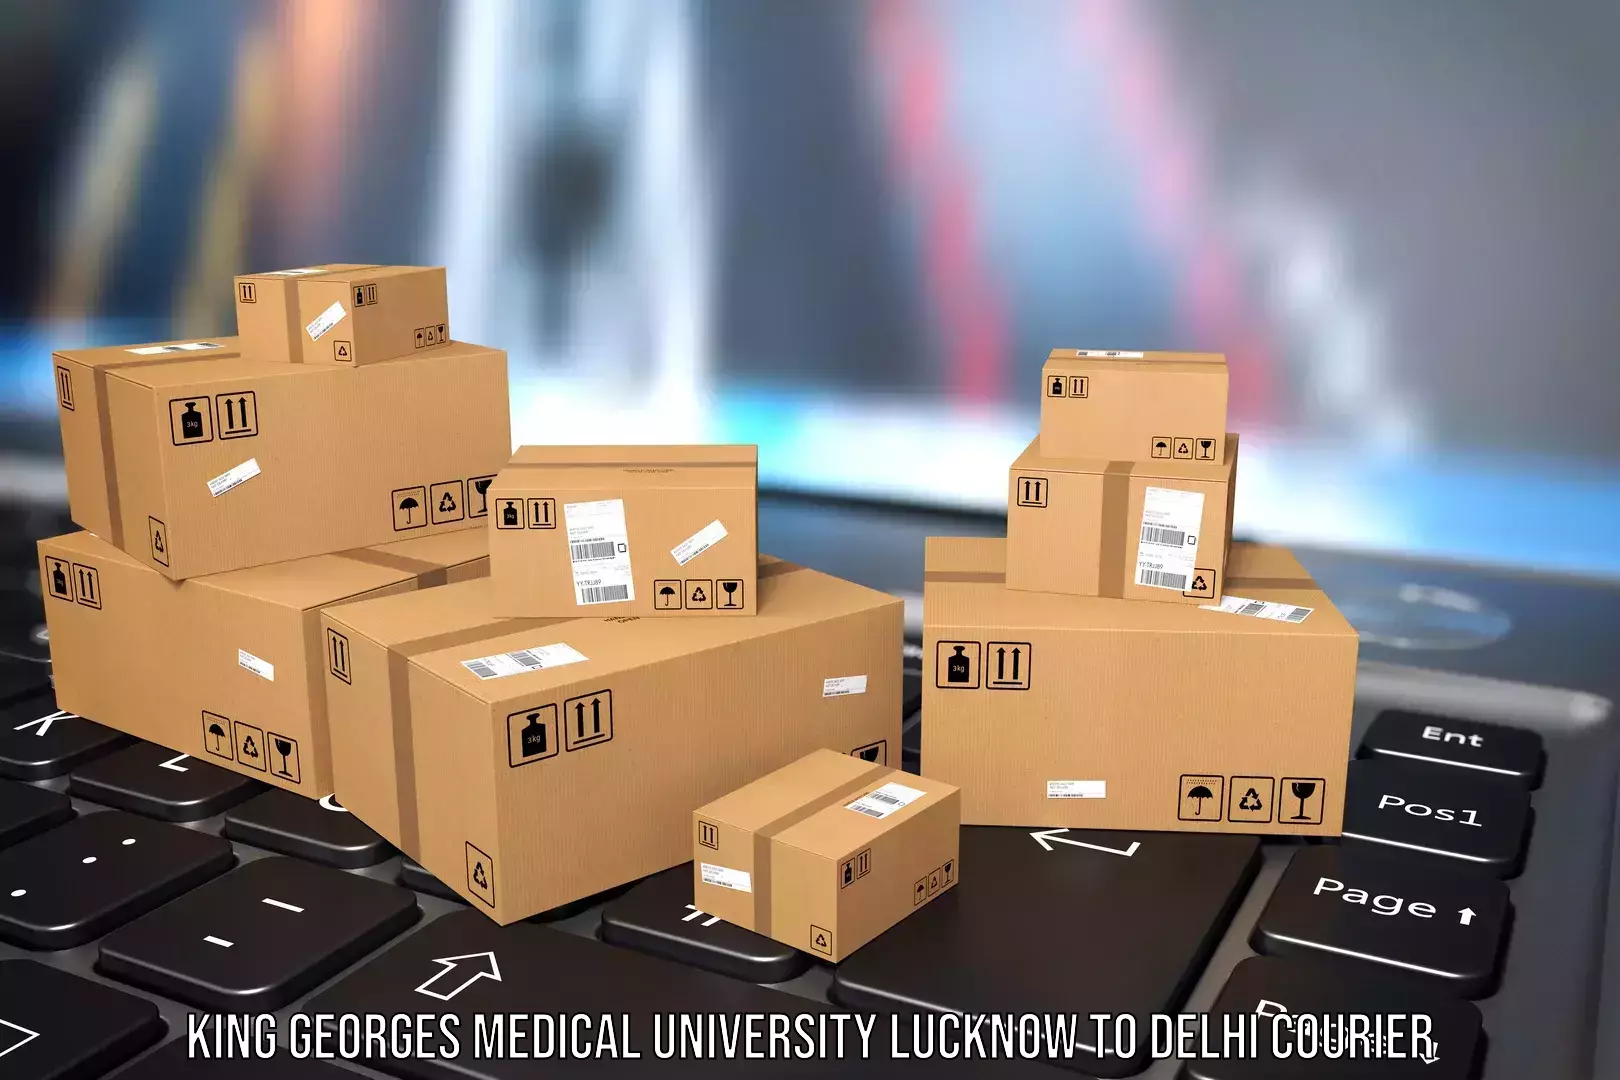 Baggage transport professionals King Georges Medical University Lucknow to NCR